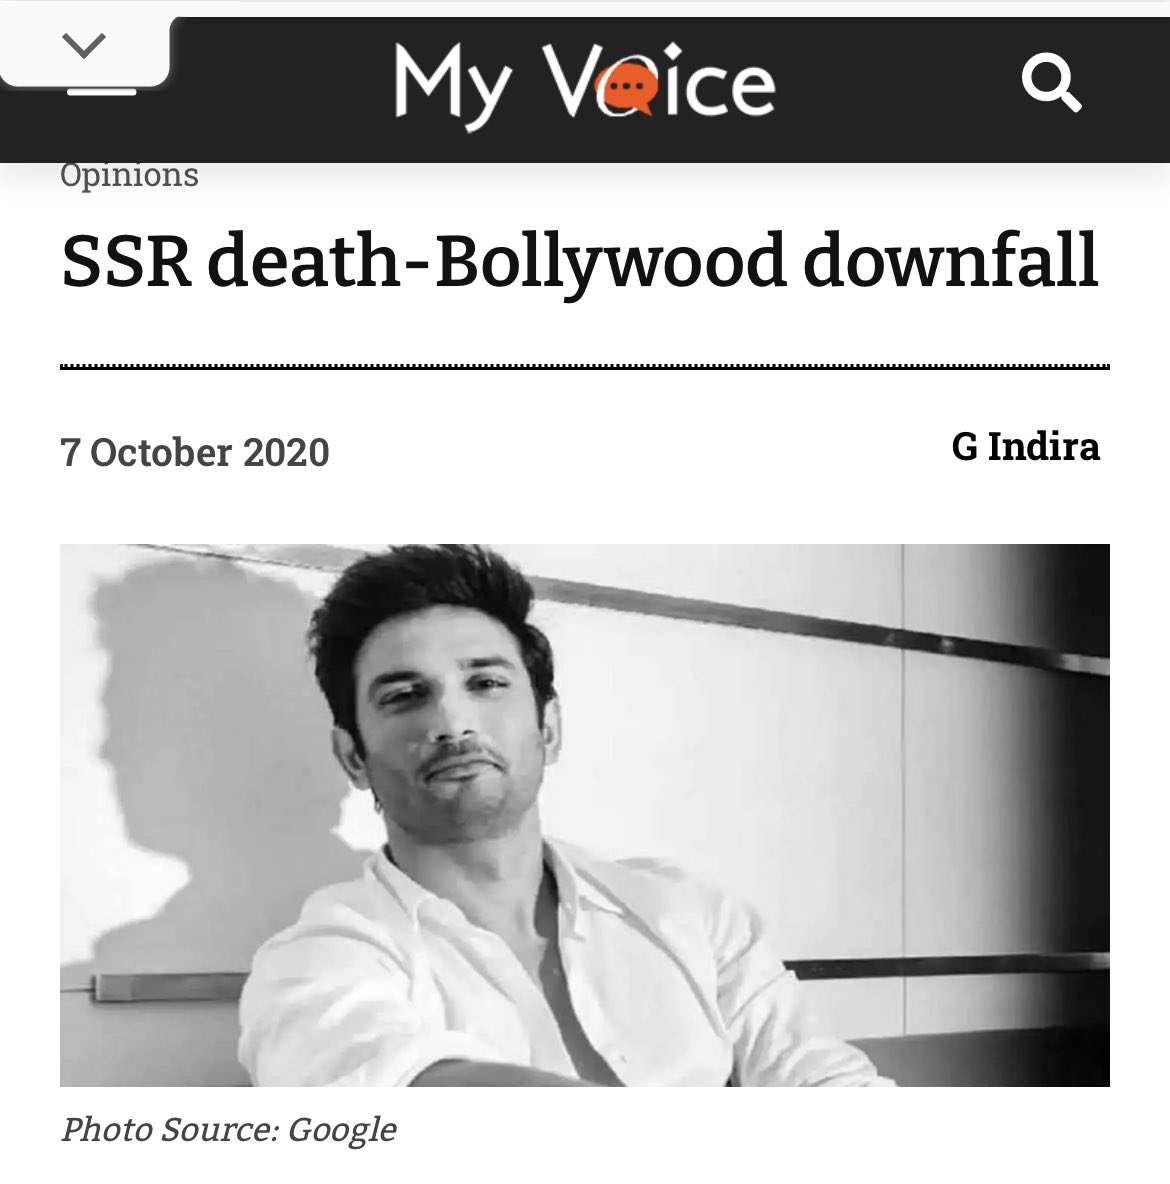 Our Sushant A Game Changer because his demise lead to Bollywood downfall

Now,
#BollywoodKiGandagi is fully exposed and 
#BollywoodKeBhaand ki Movies continue to FLOP one after the other🥳

#BollywoodSwaha🔥

@PMOIndia @HMOIndia @IPS_Association @CBIHeadquarters